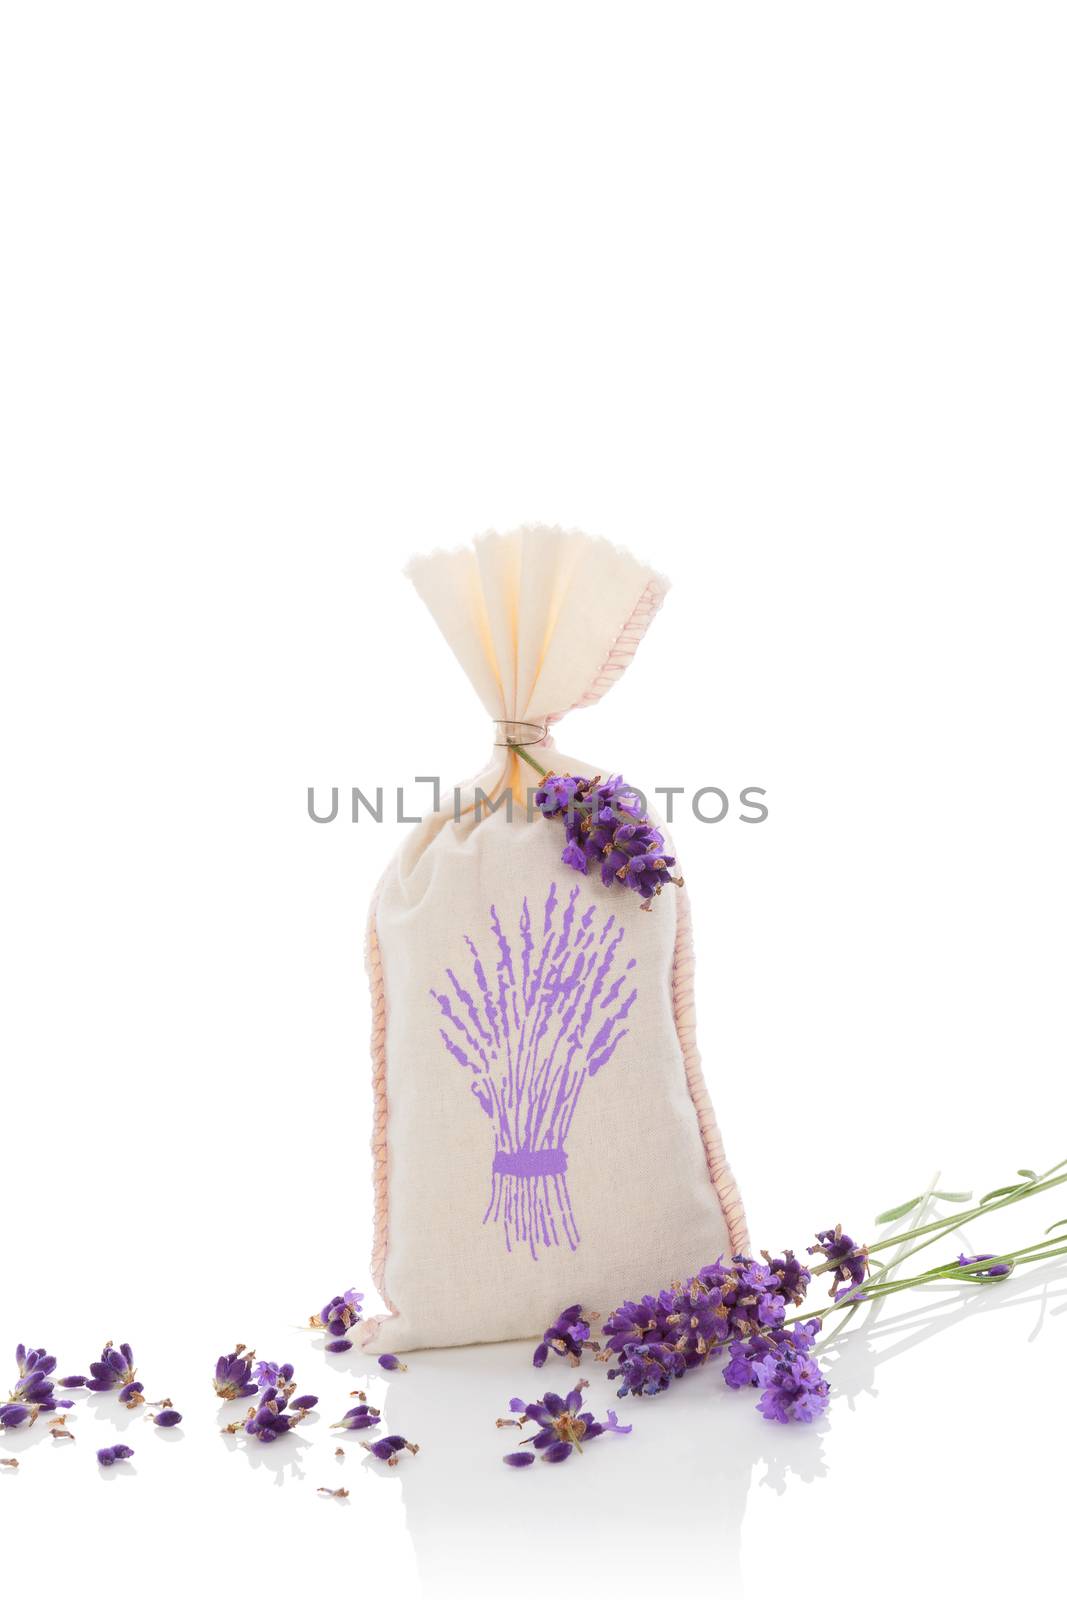 Lavender aromatherapy. Lavender herbs and bag with dry lavender isolated on white background. Alternative medicine.